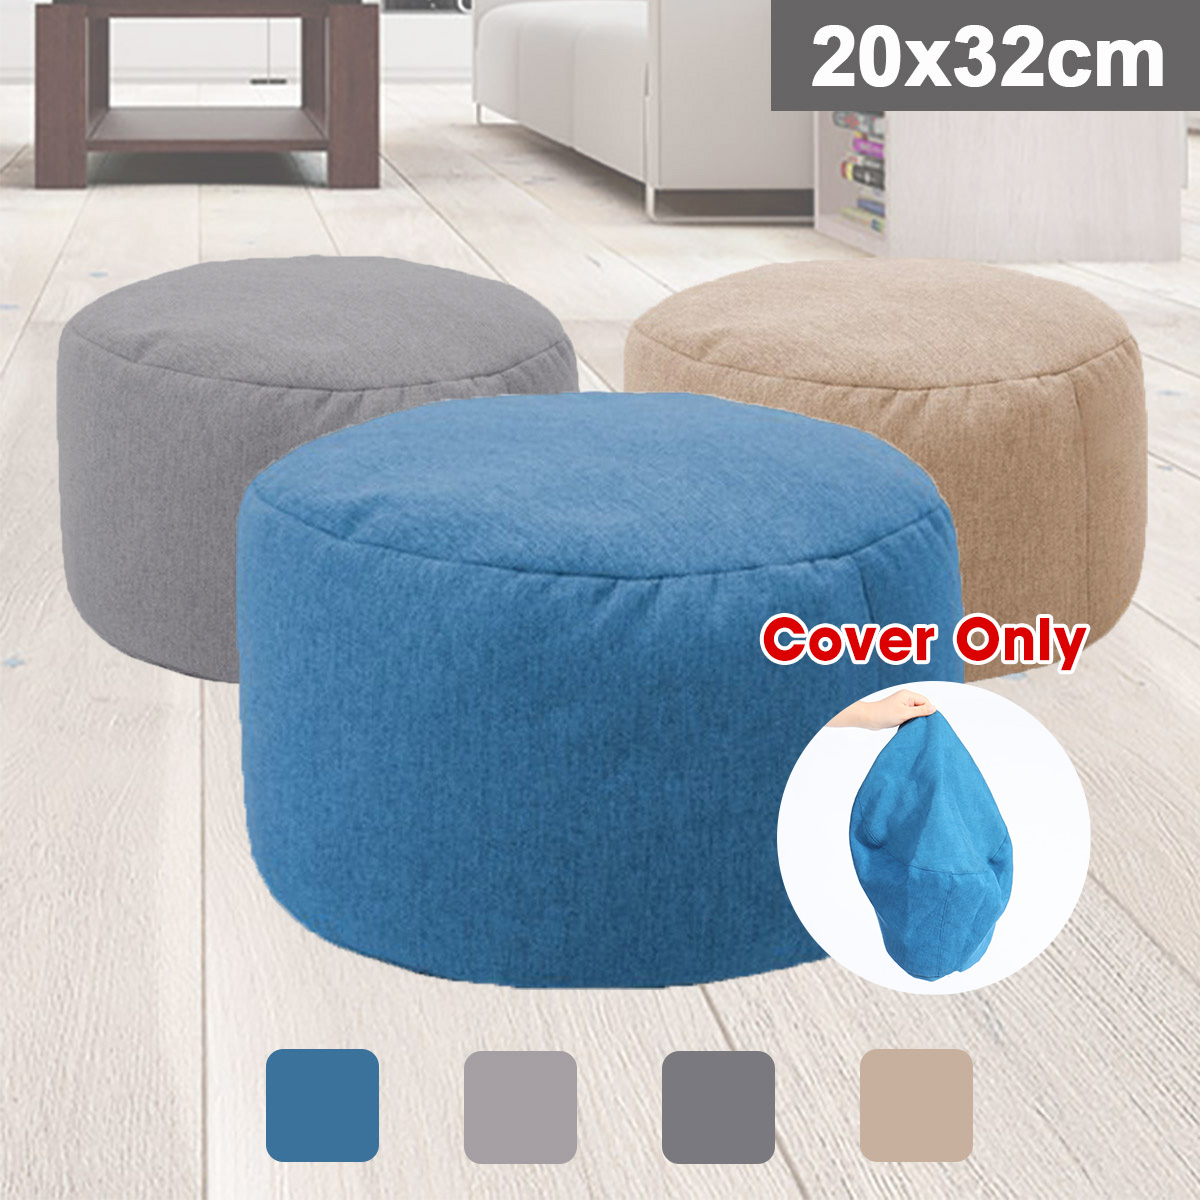 20*32cm Bean Bag Footool Cover Indoor for Adults Kids Multicolor Lazy Sofa 1